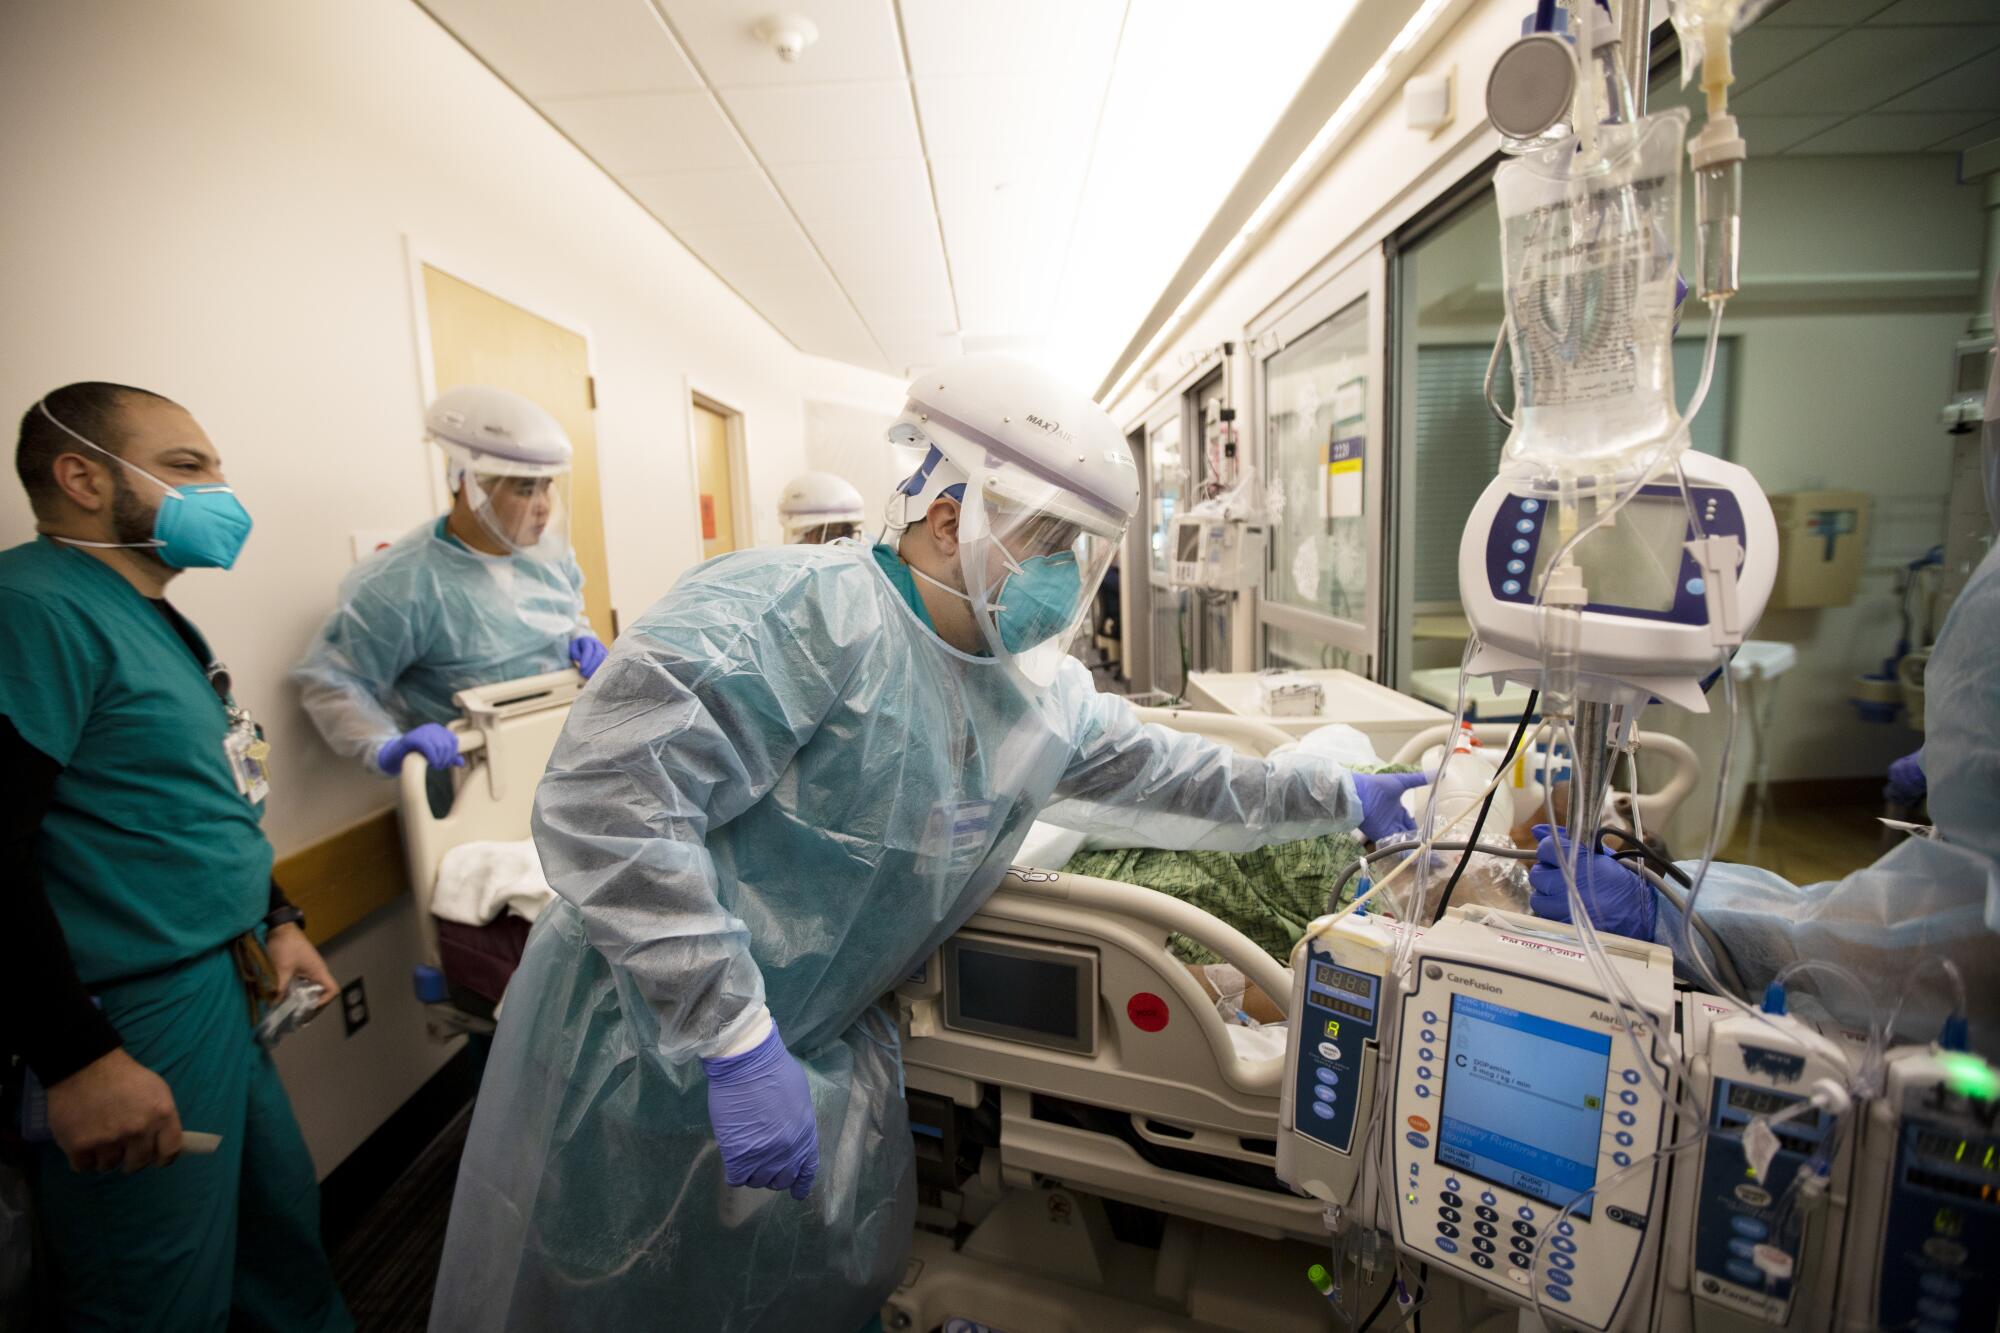 Hospital staff in protective gear move a gurney and monitors.